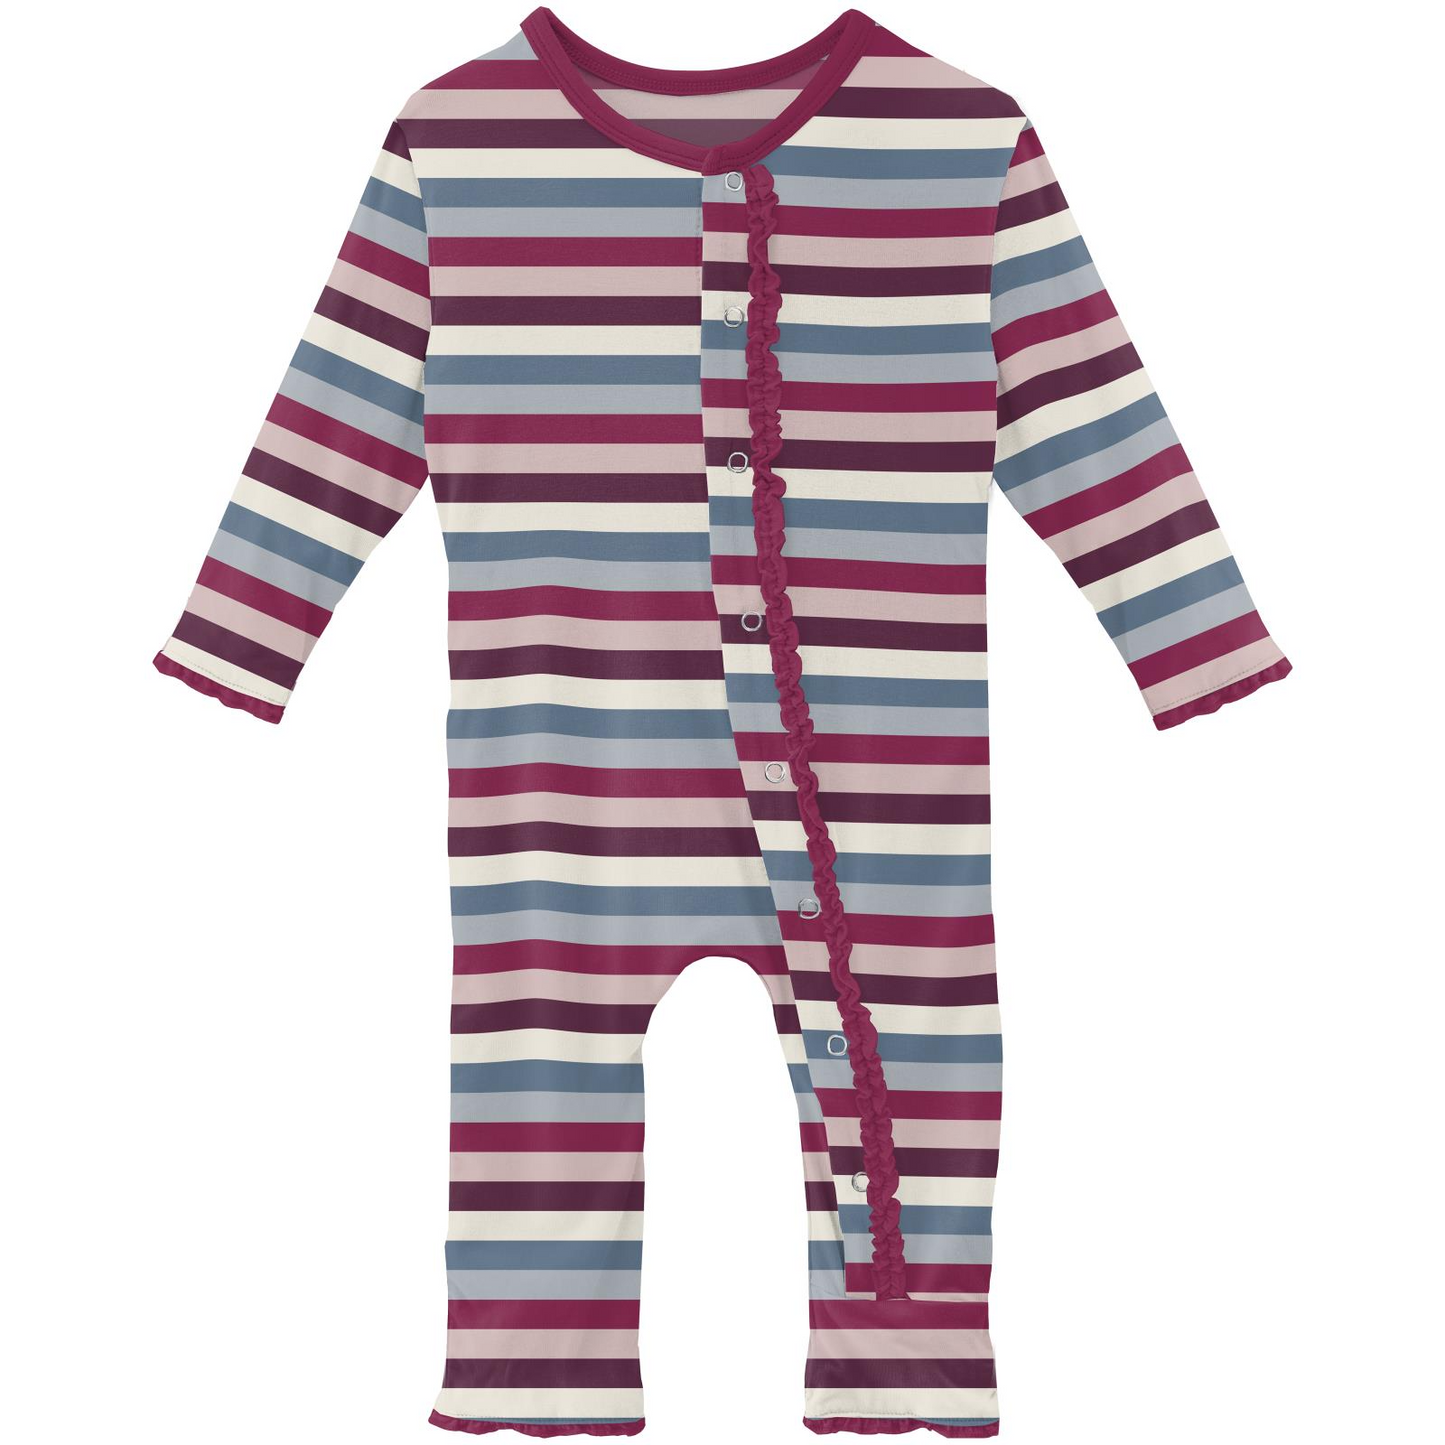 Bamboo Print Muffin Ruffle Coverall with Snaps: Jingle Bell Stripe